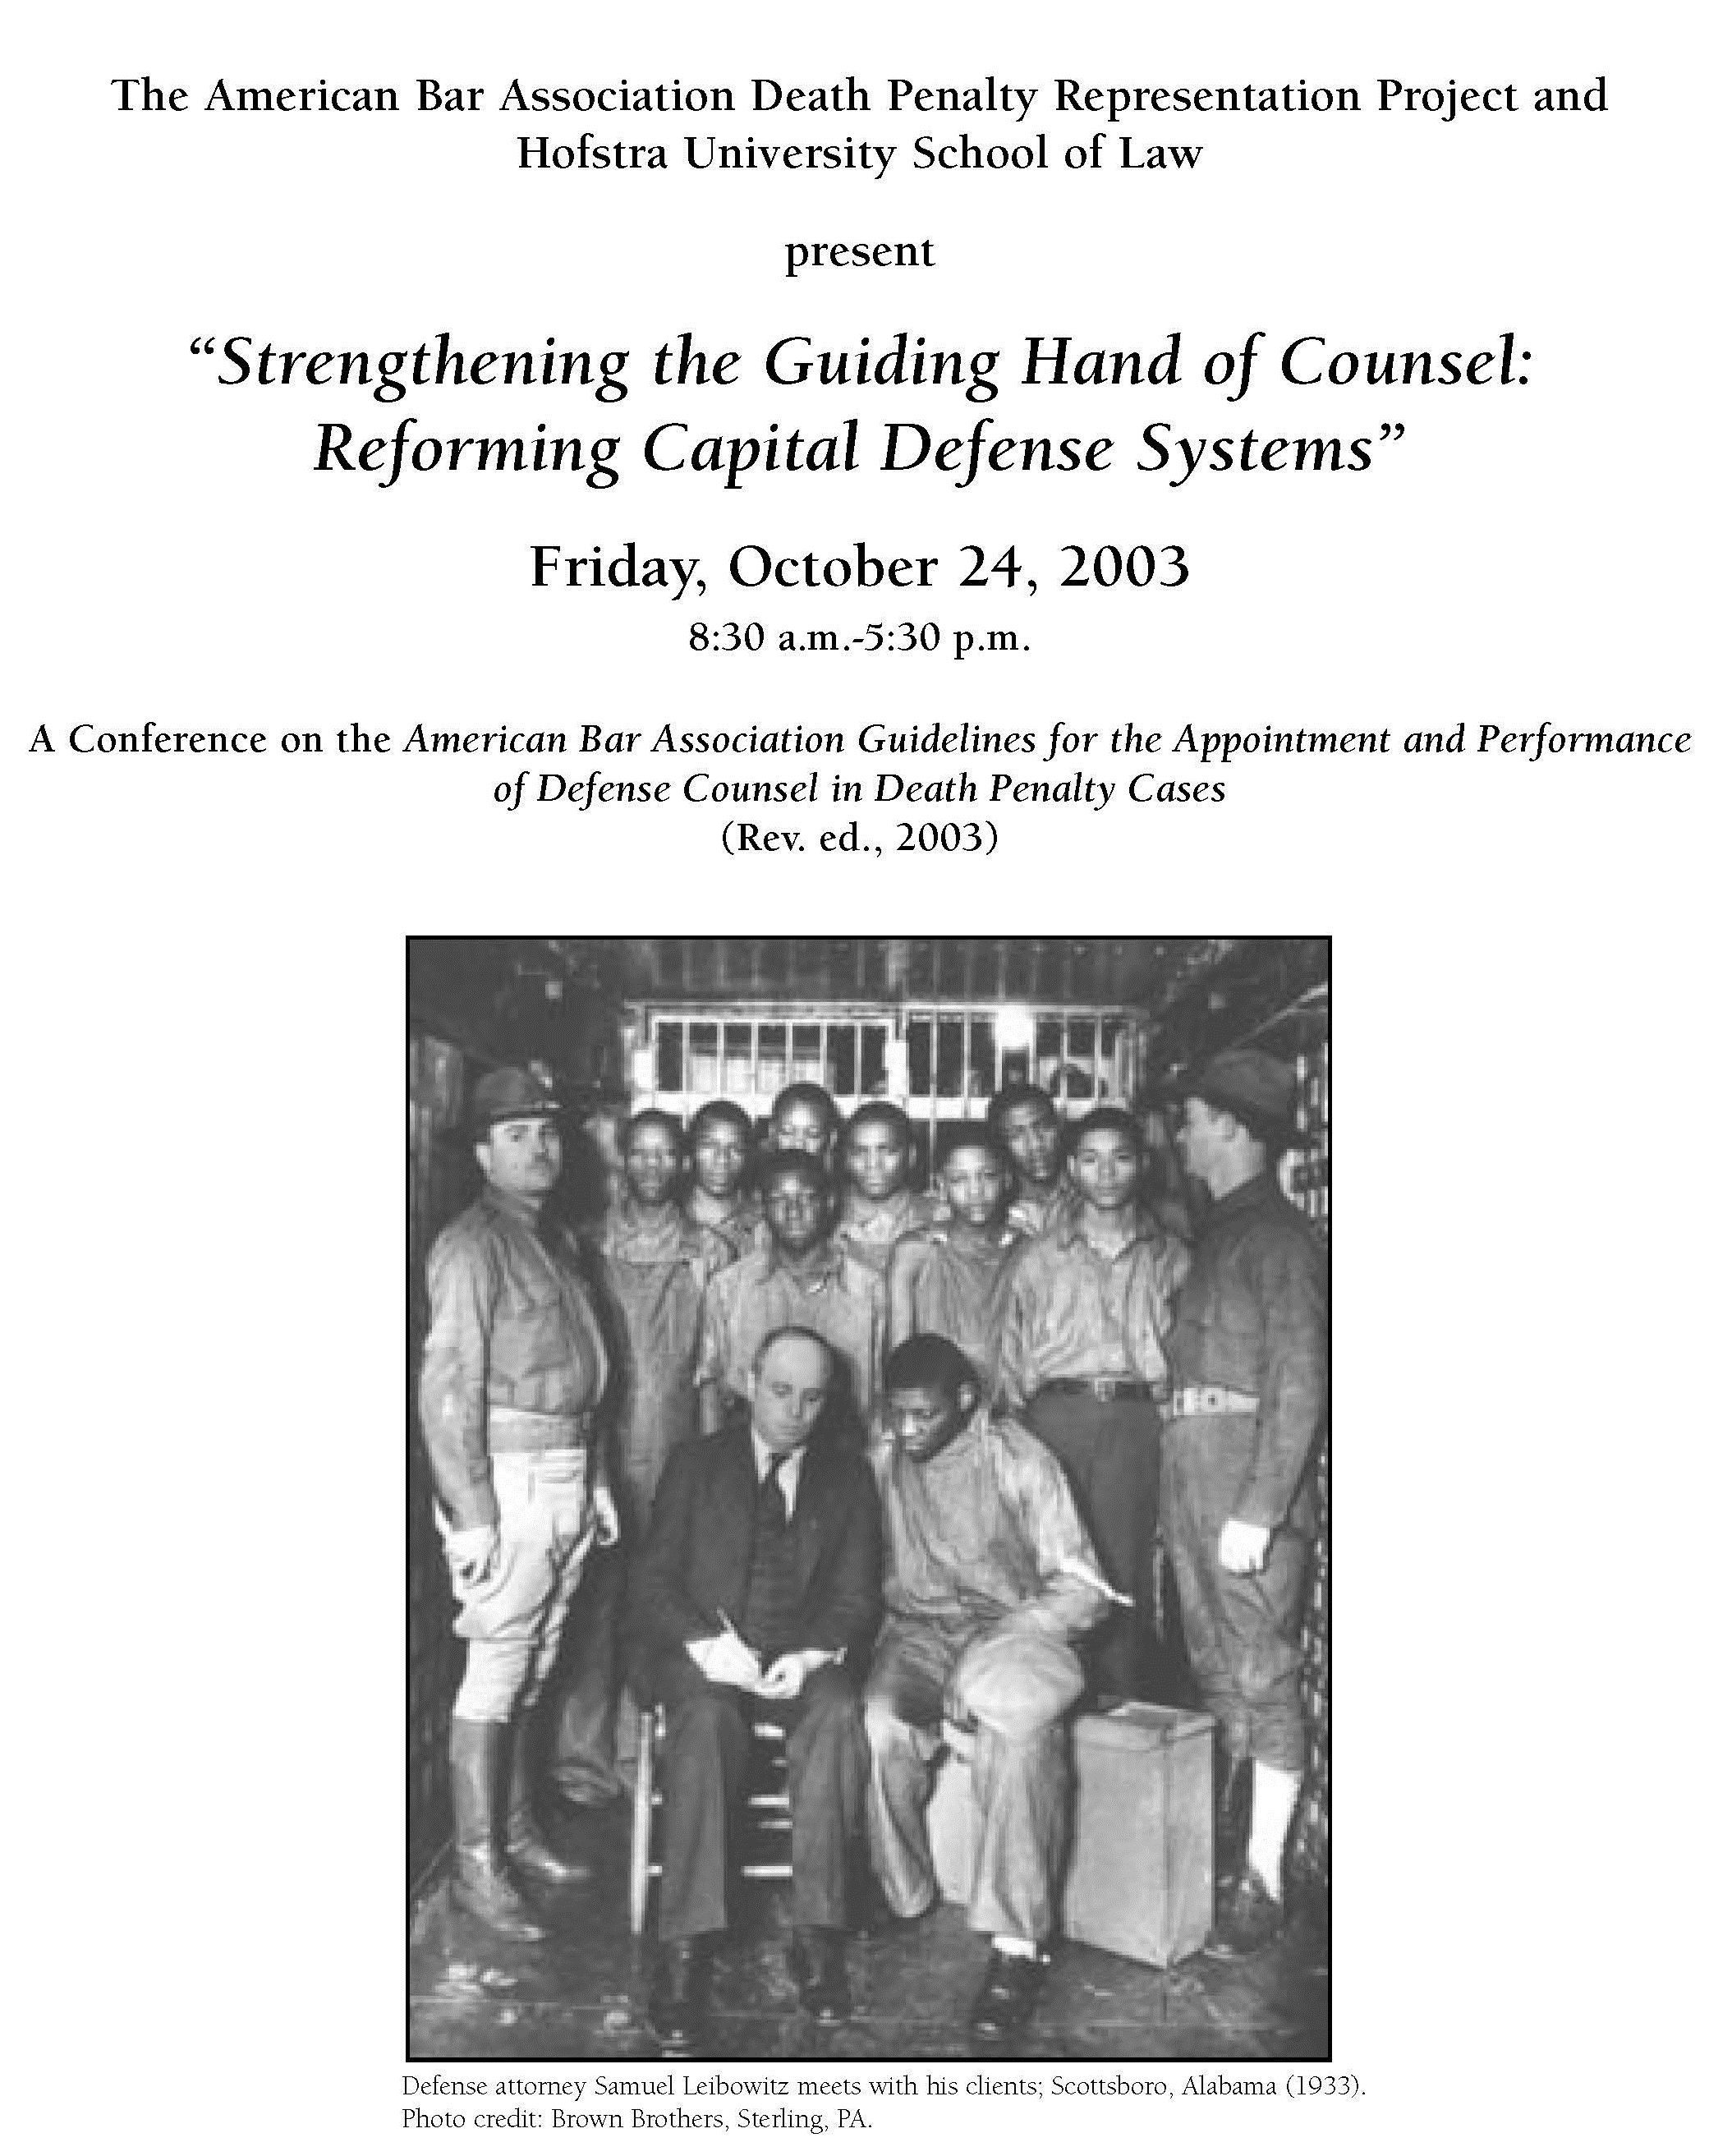 “Strengthening the Guiding Hand of Counsel: Reforming Capital Defense Systems” : A Conference on the American Bar Association Guidelines for the Appointment and Performance of Defense Counsel in Death Penalty Cases (2003)